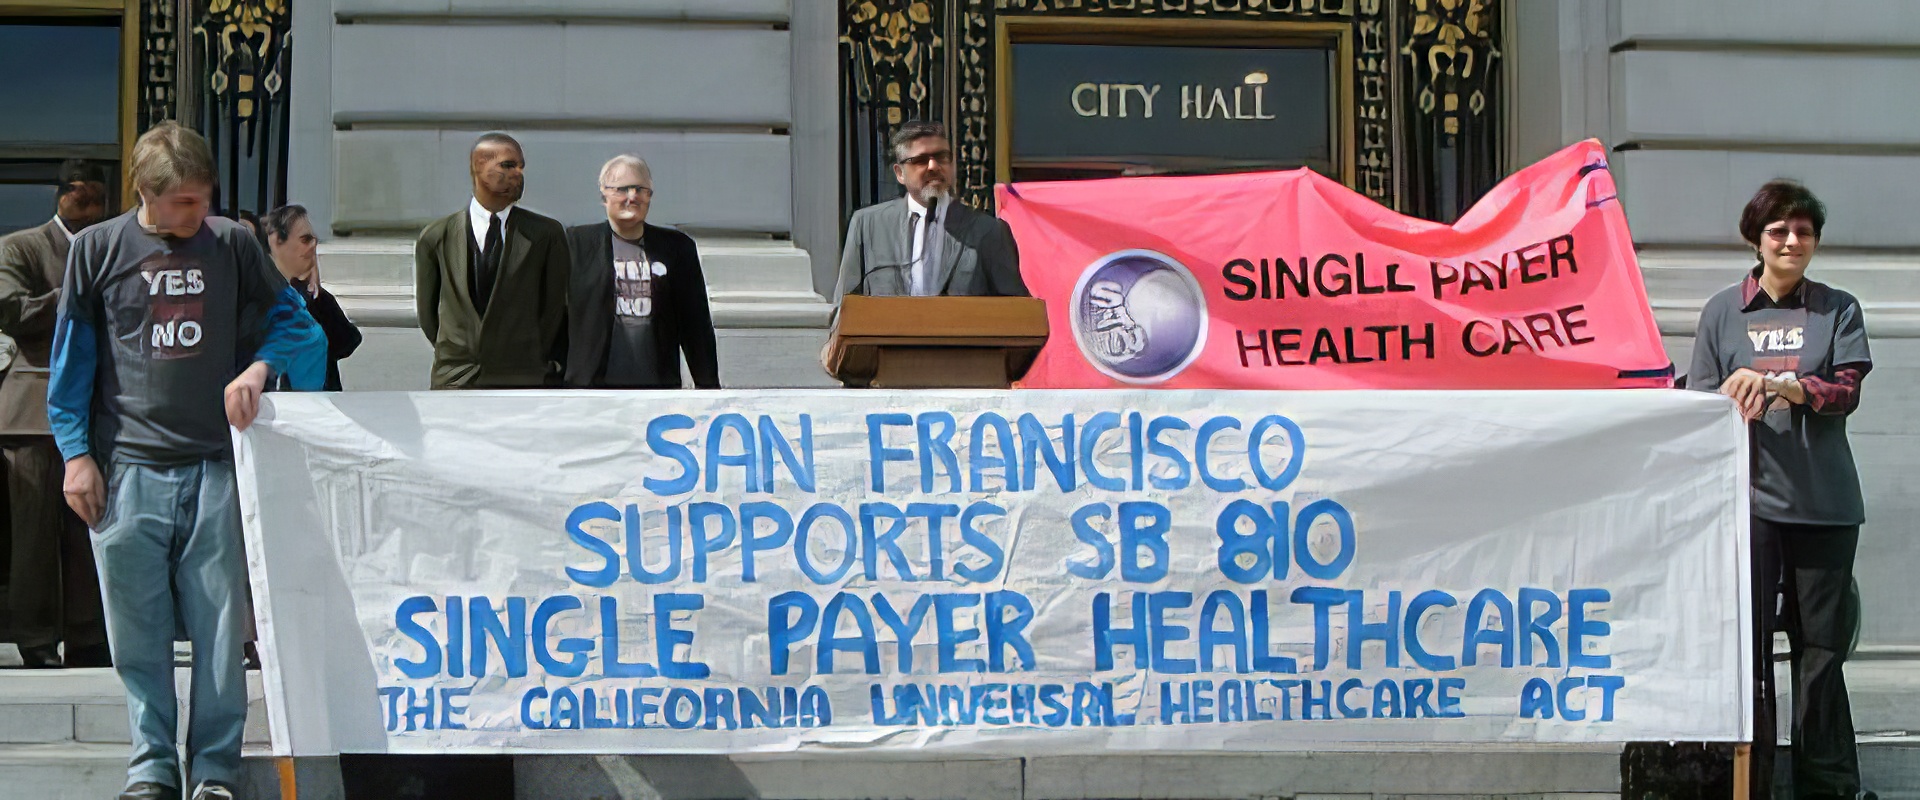 On the steps of SF City Hall, supporters of single payer healthcare hold up a banner that reads "San Francisco supports SB 810 single payer healthcare"